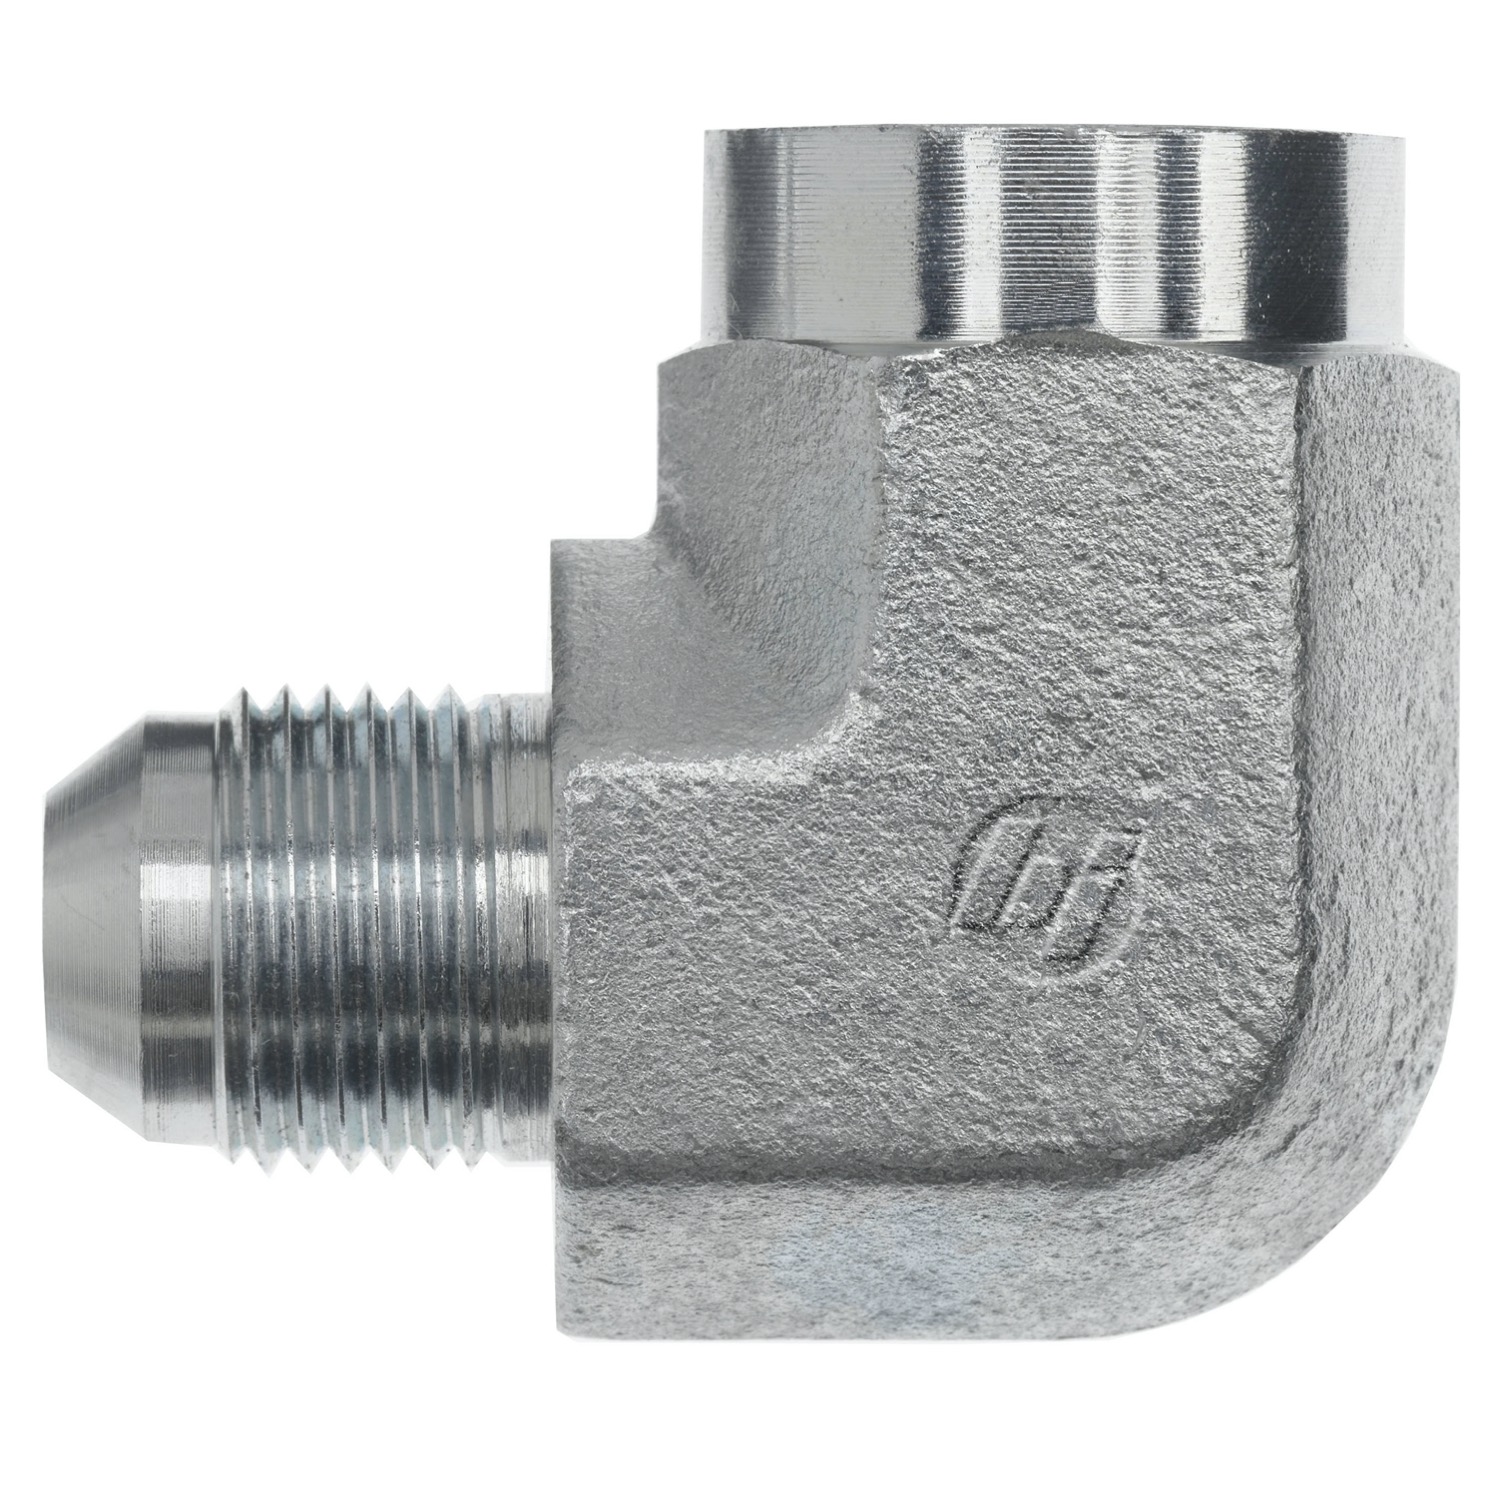 Hydraulic Hose Adapters - Elbow 90° Fitting, JIC 37° Flare to NPTF- 2502 Series 2502-20-20-FG